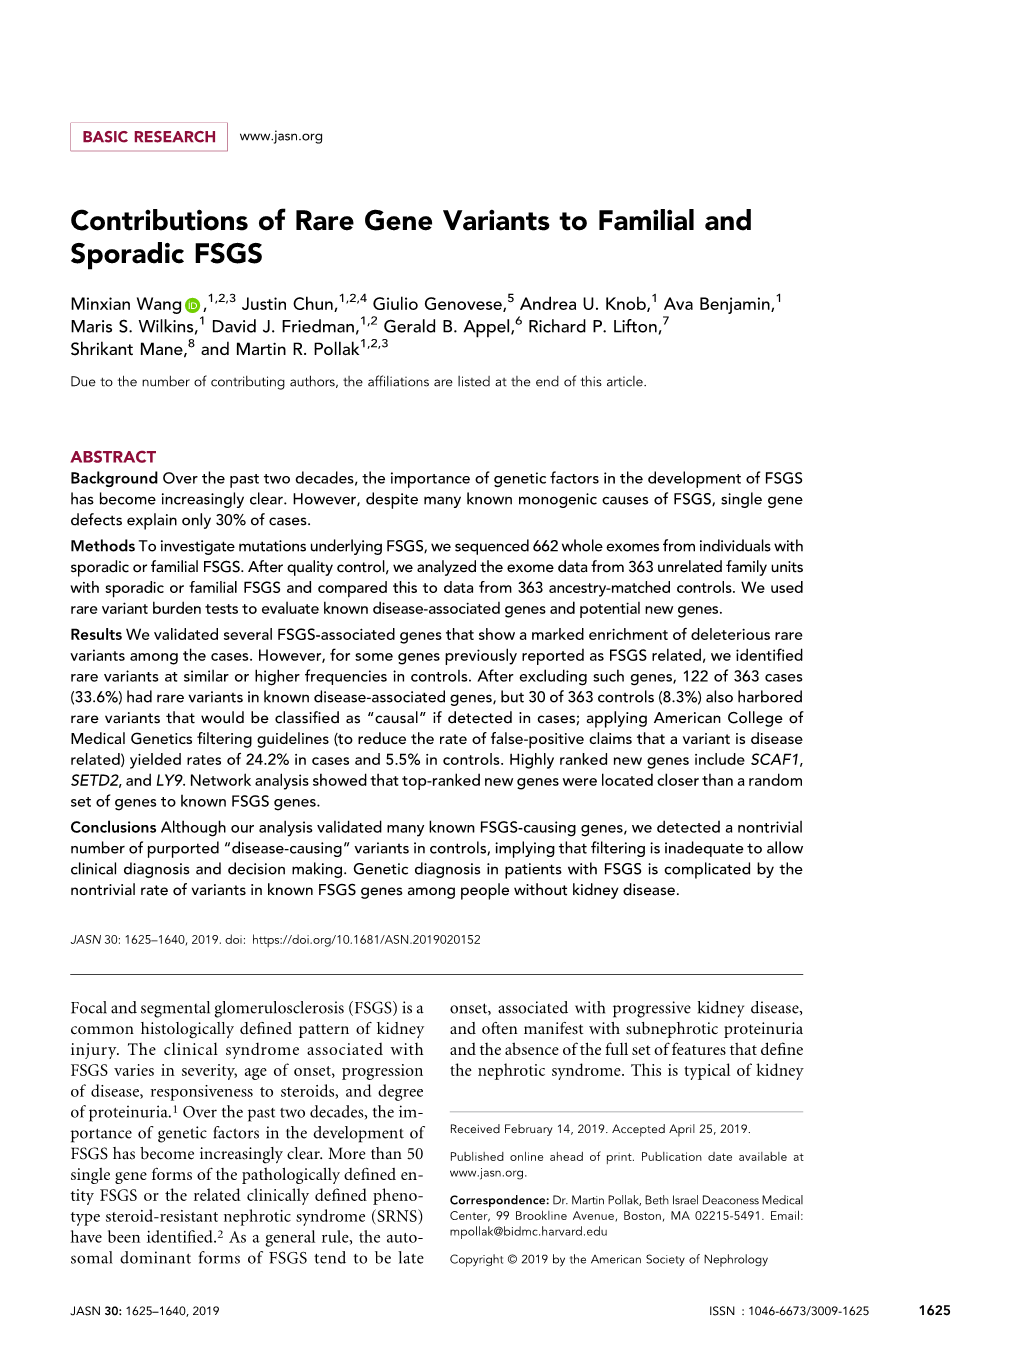 Contributions of Rare Gene Variants to Familial and Sporadic FSGS